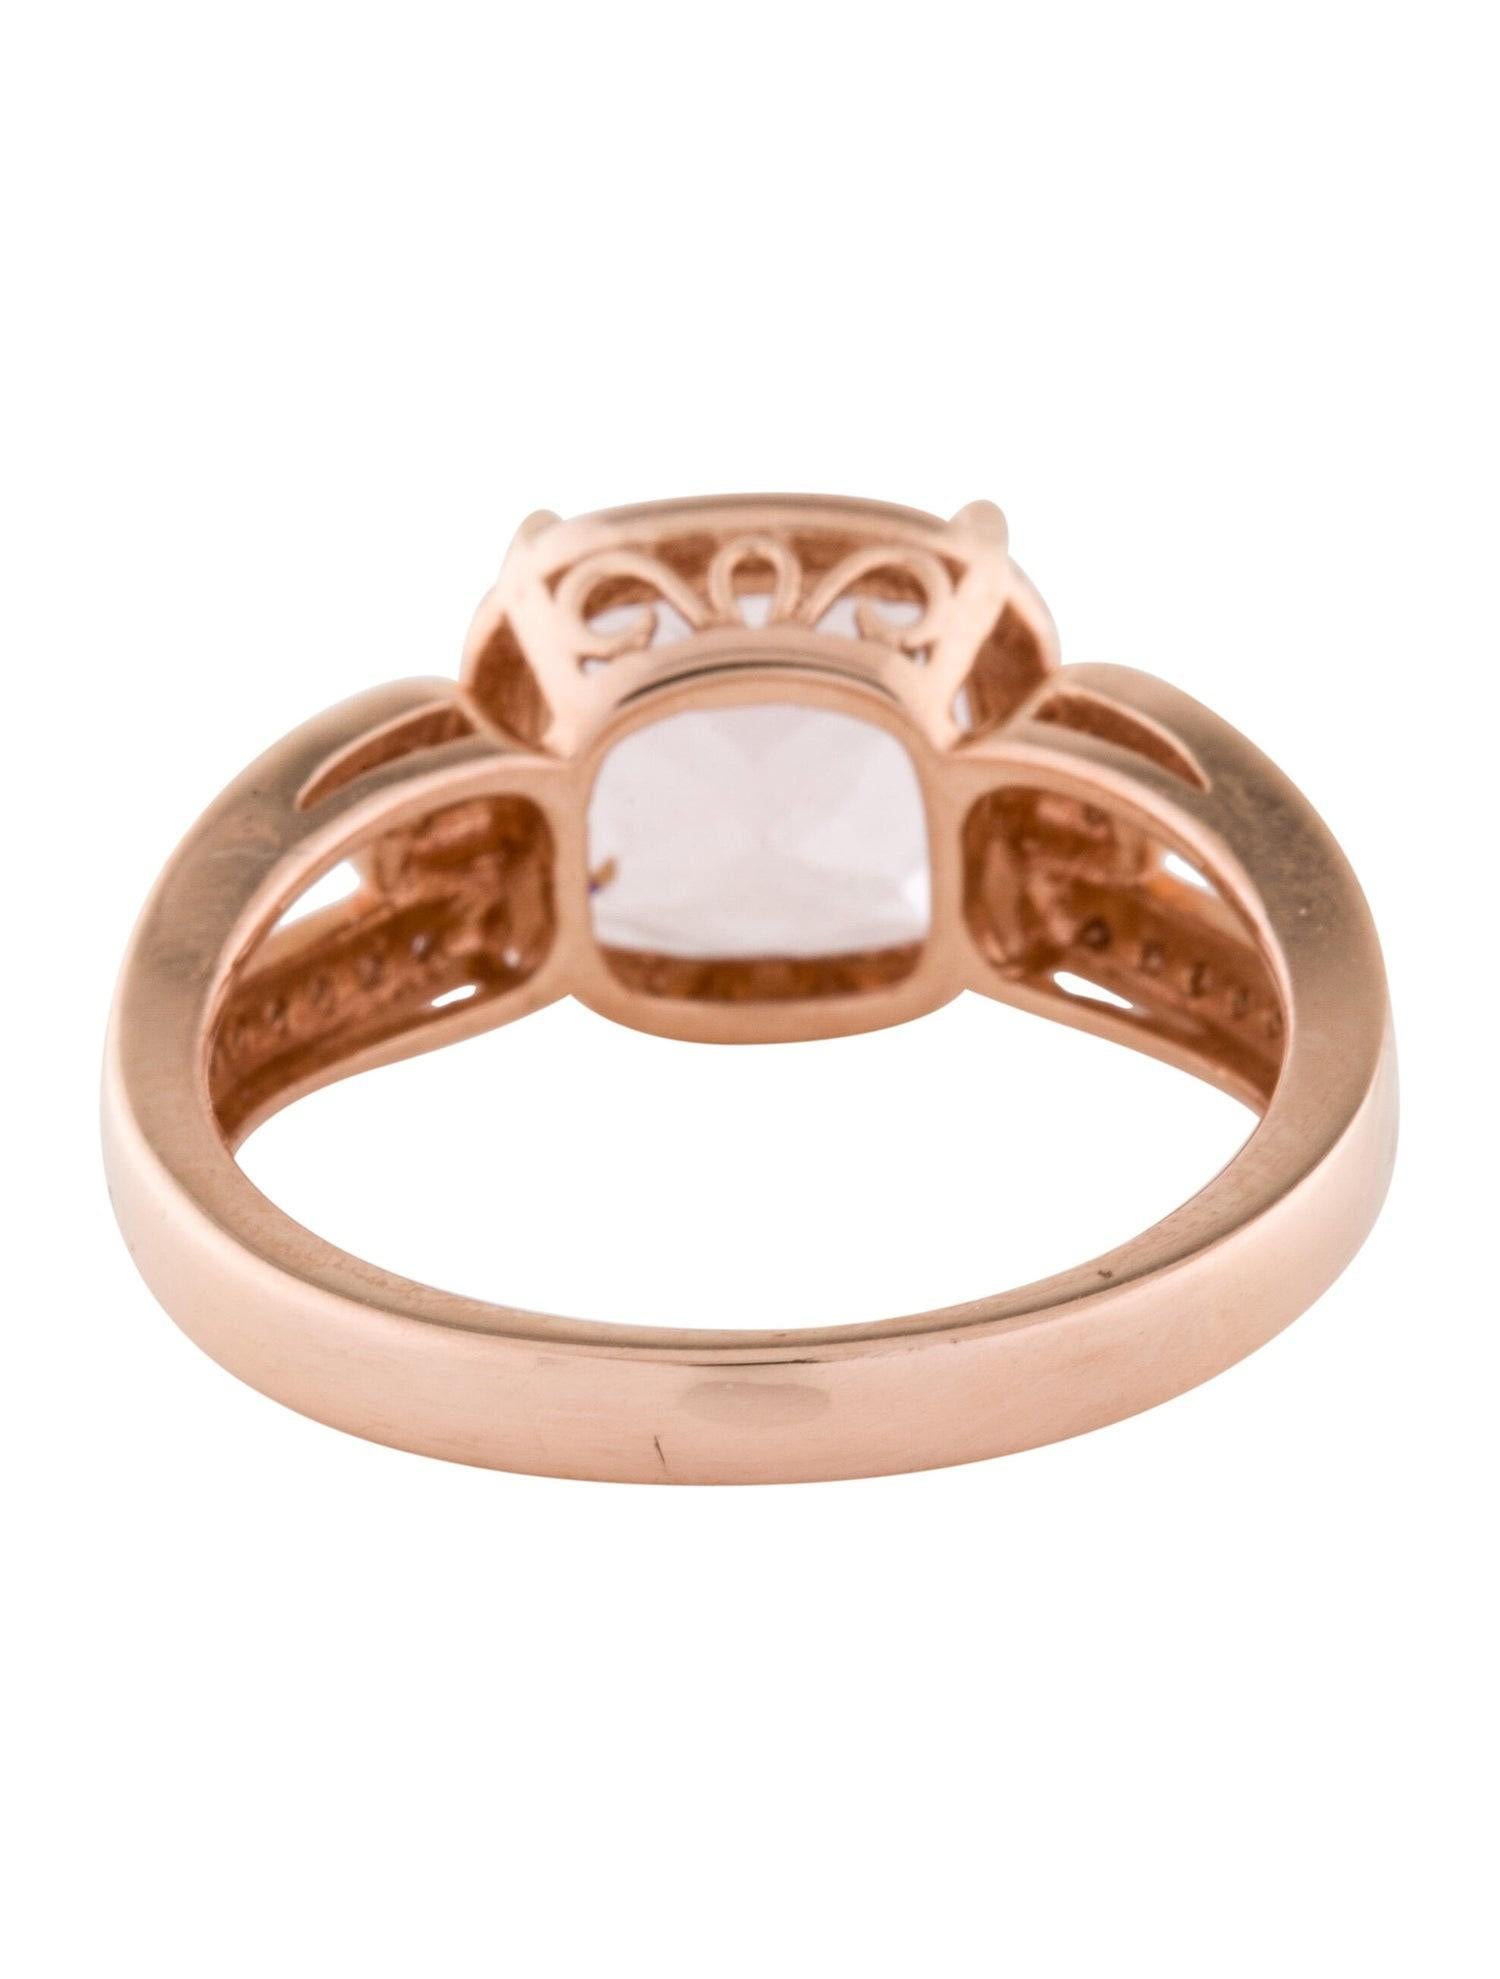 Contemporary 14K Rose Gold Cushion Morganite Cocktail Ring For Sale